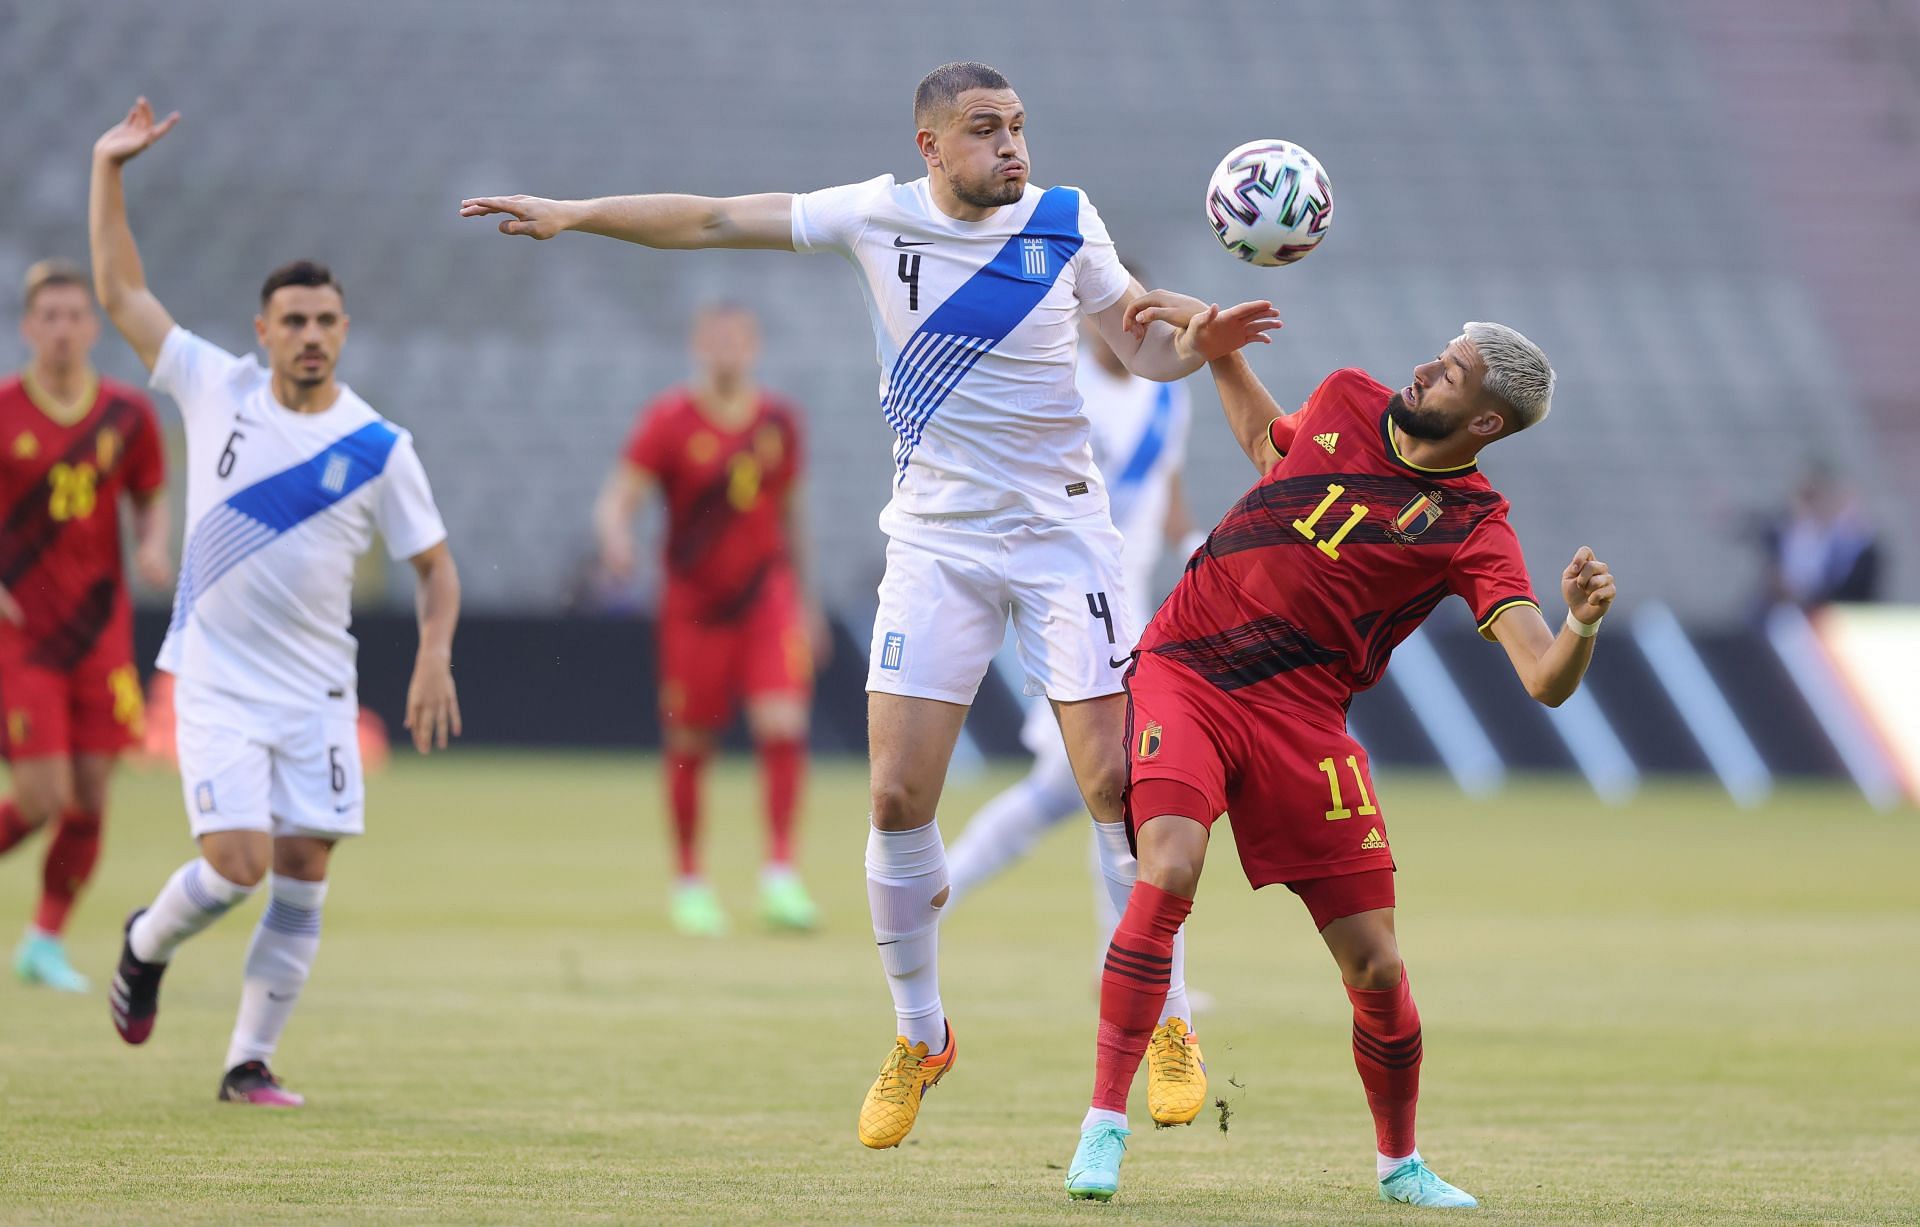 Greece lock horns with Romania in a friendly fixture on Friday